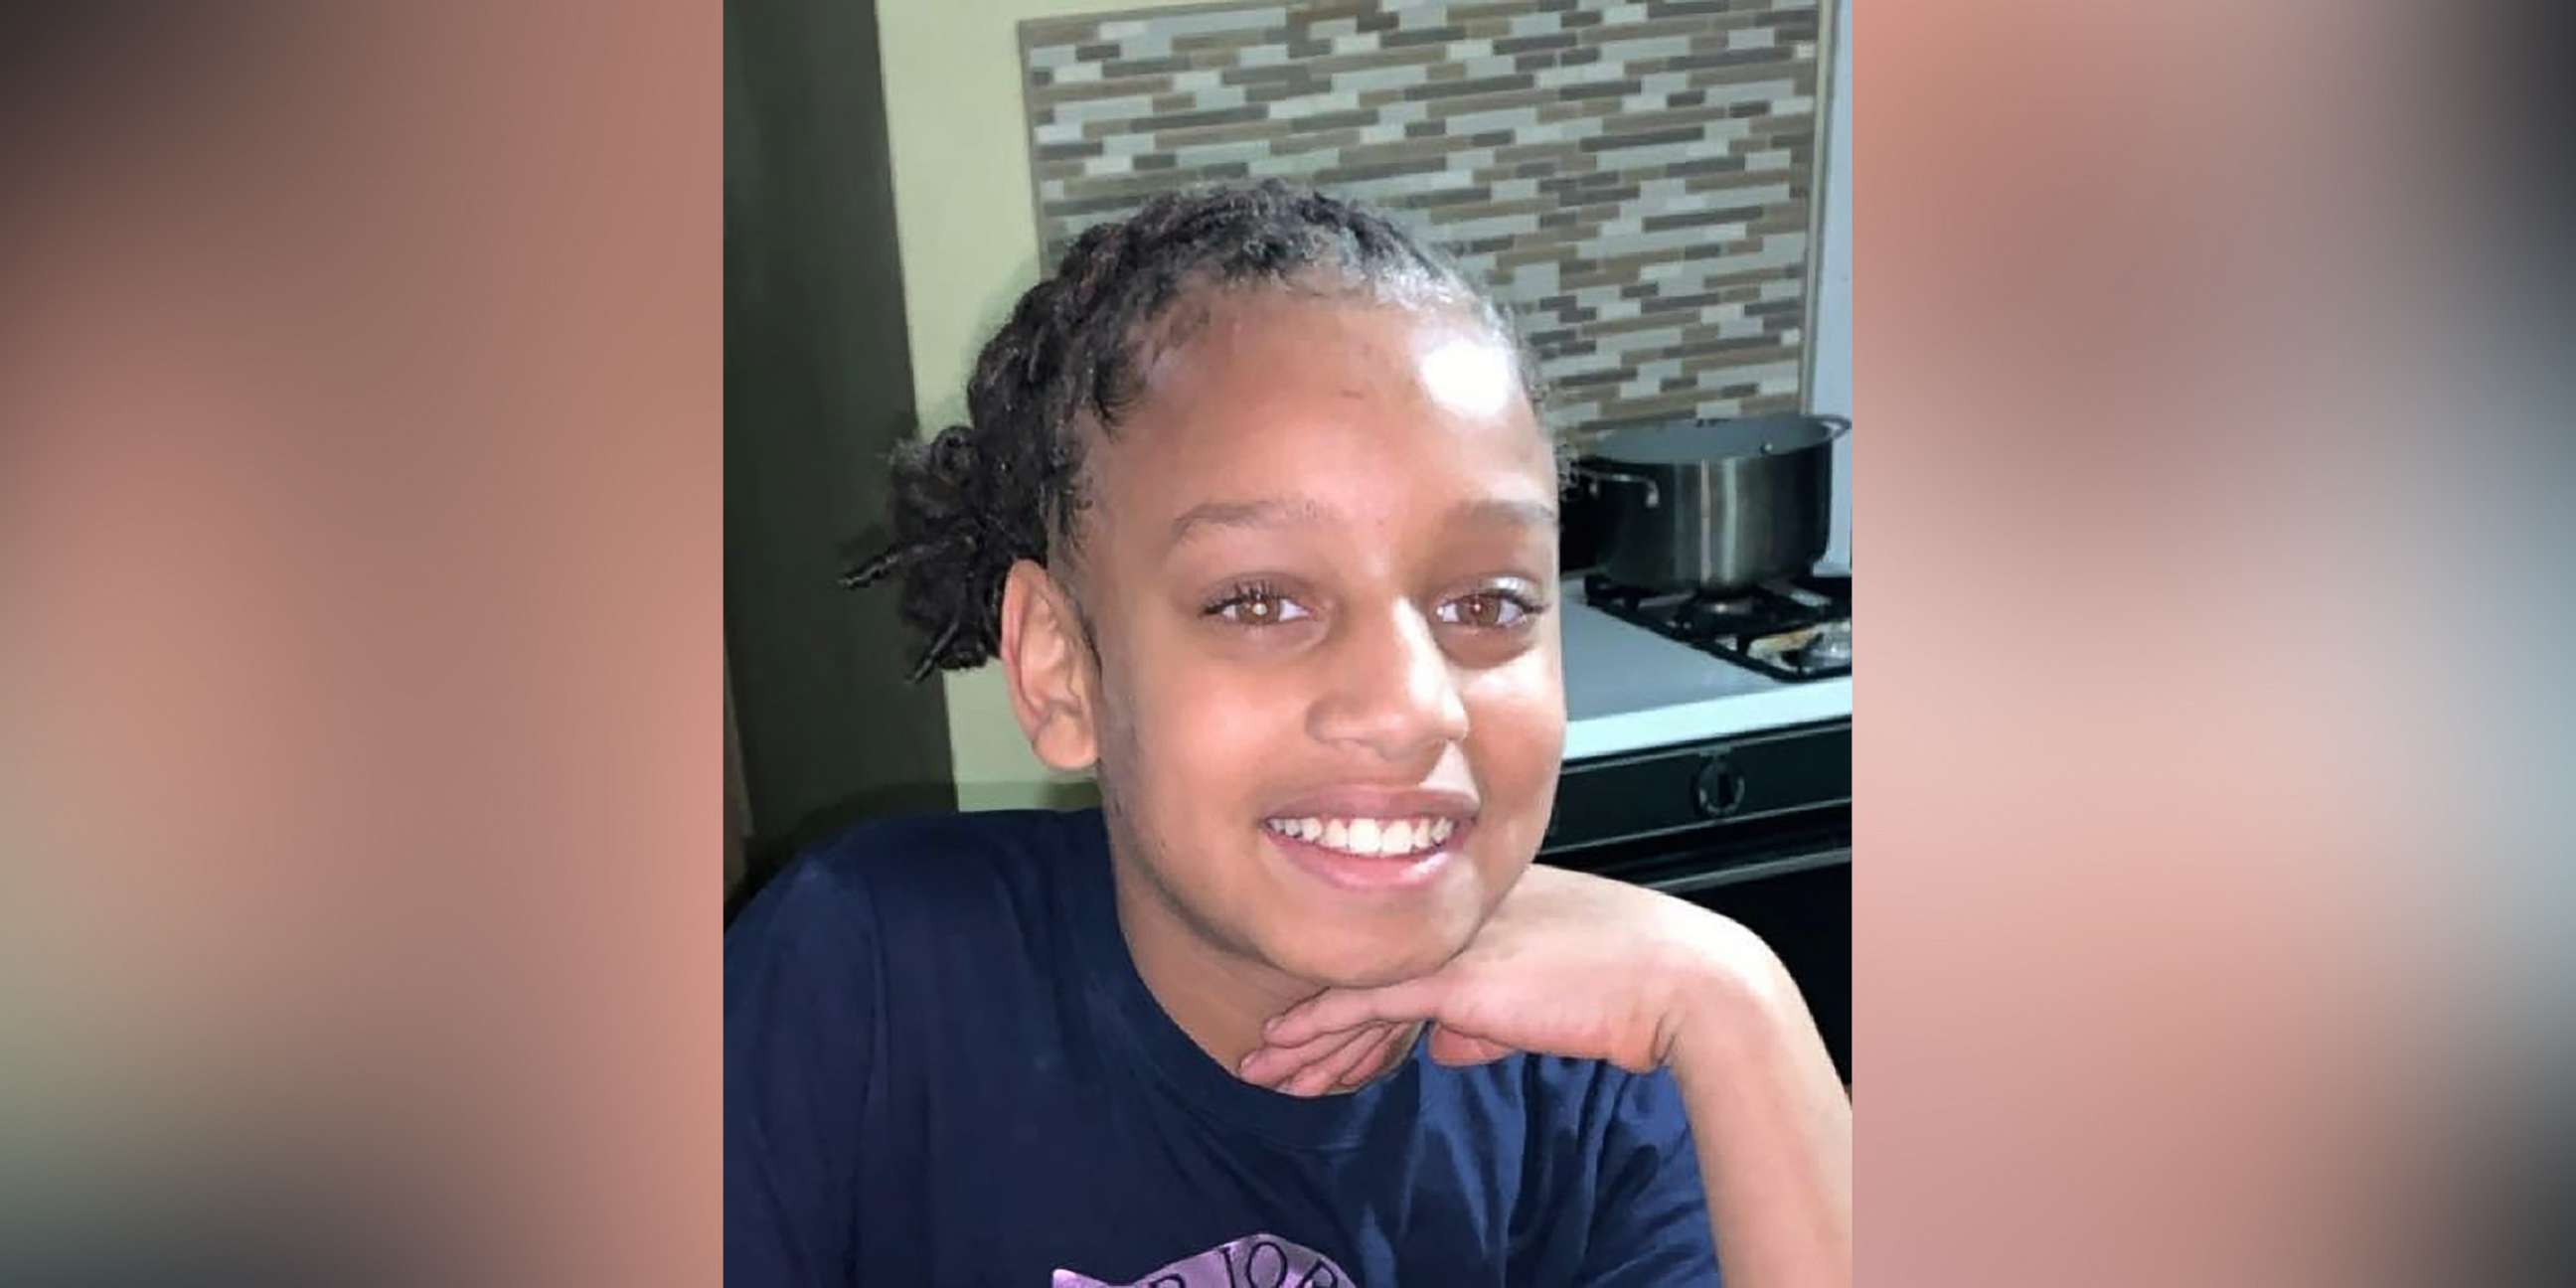 PHOTO: The FBI posted this image of Bresia Taylor, a 10-year-old girl last seen July 10, 2020. Davenport, Iowa police are looking for a suspect after her remains were found in late March 2021.